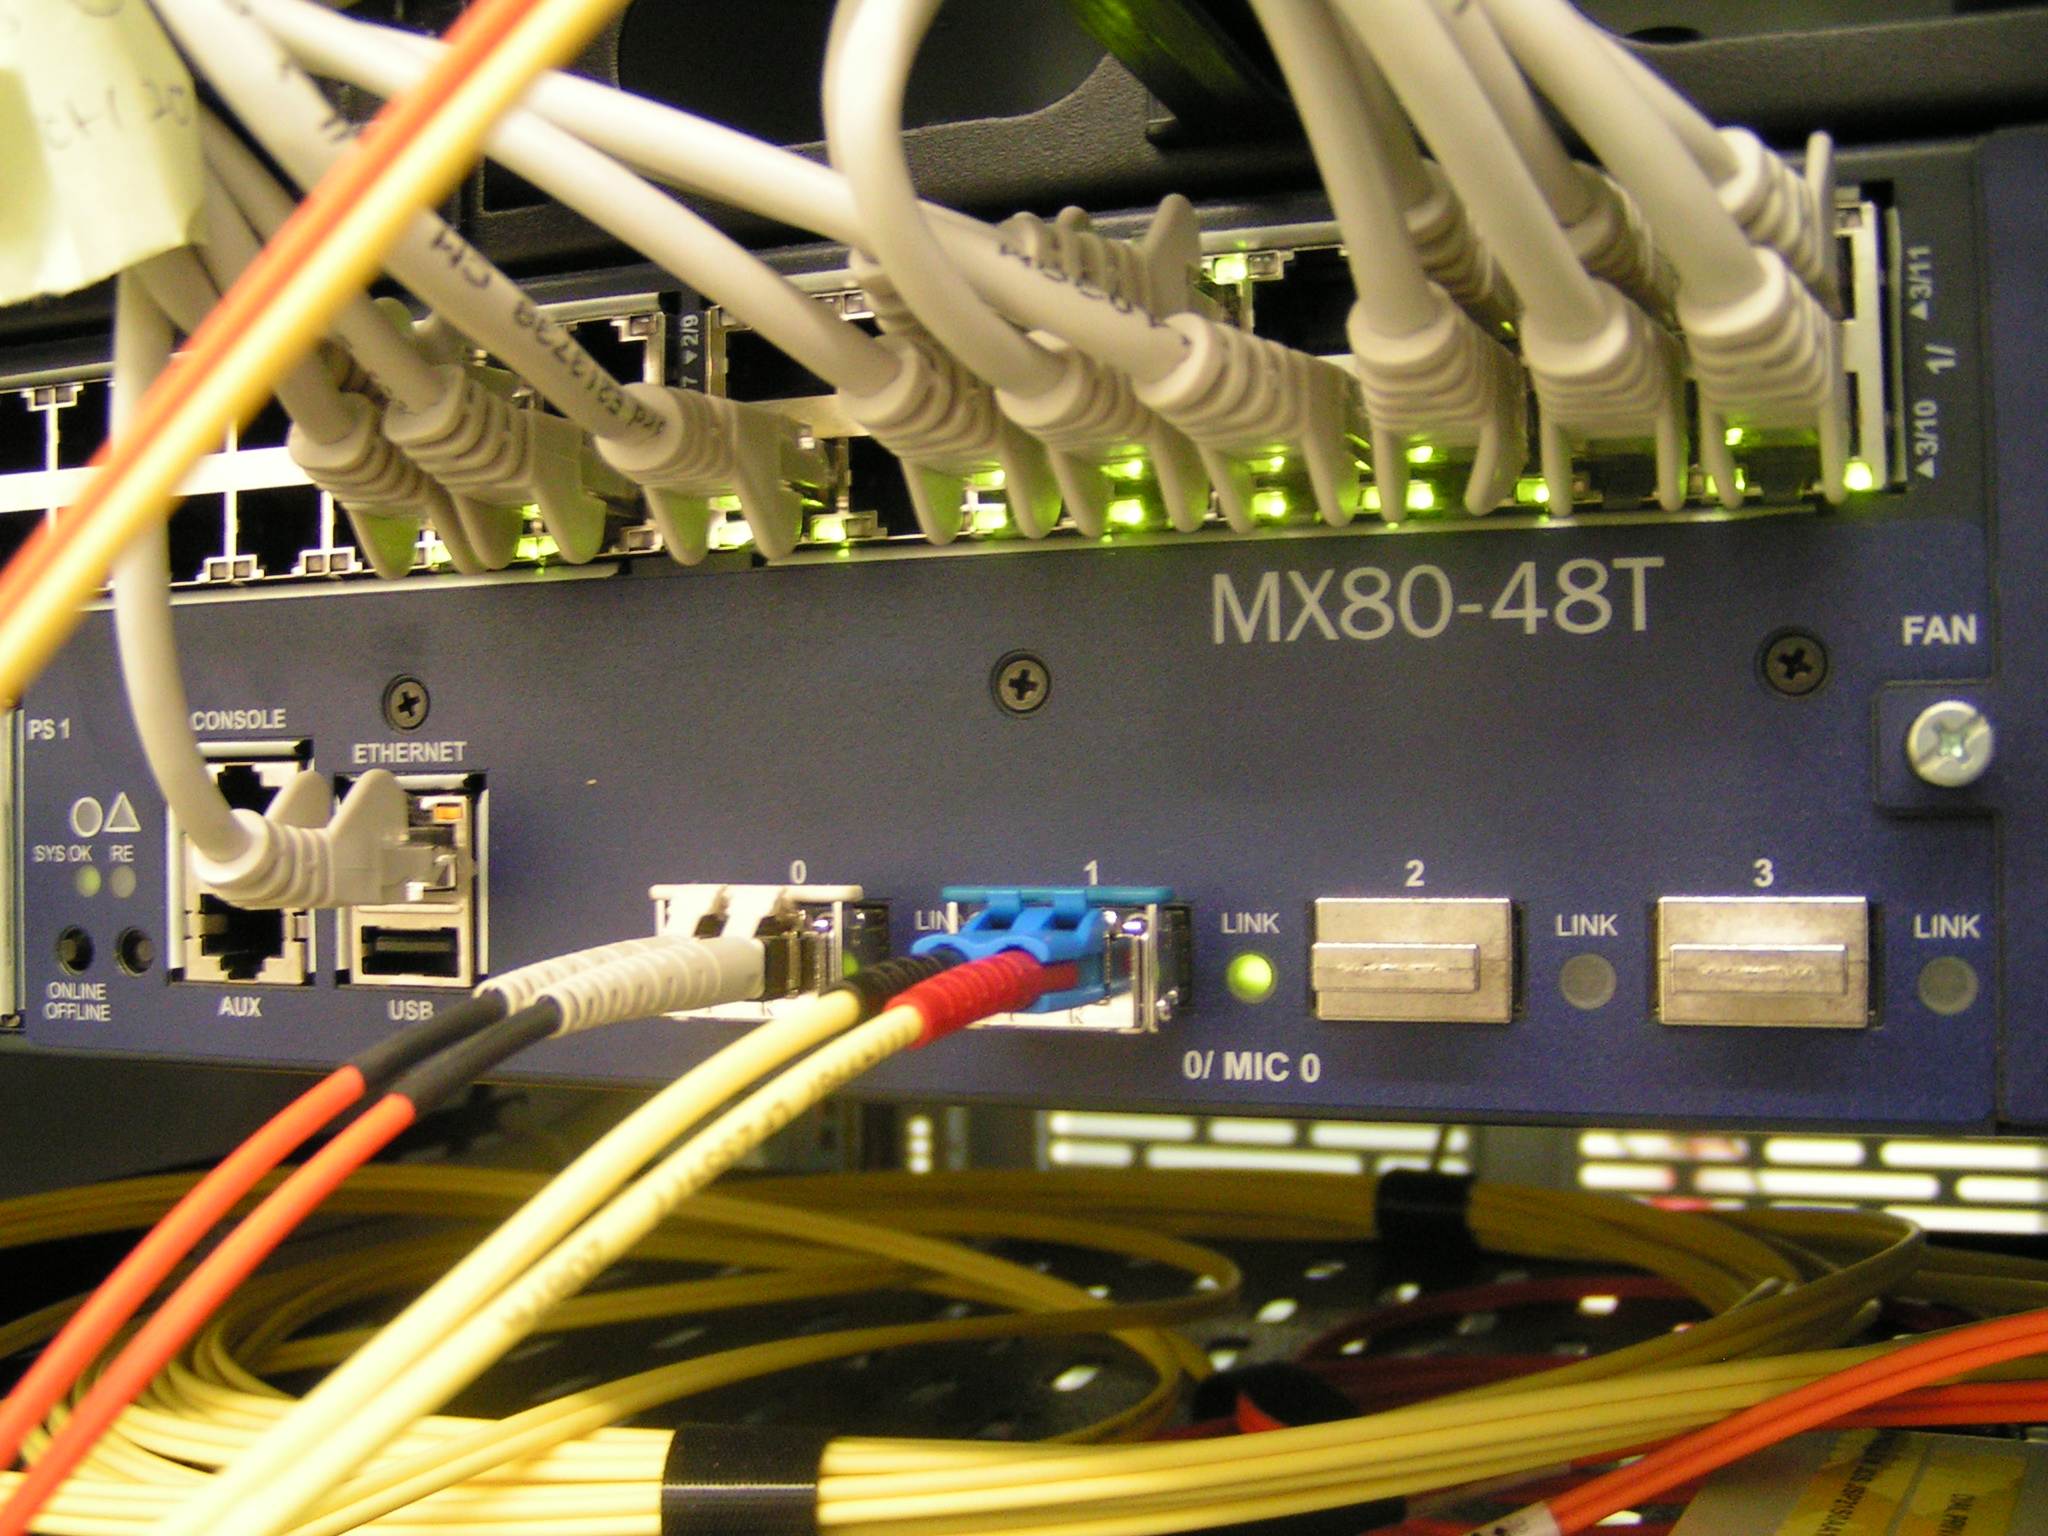 The main Coolhousing routing system is ensured by Cisco 7600 series and Juniper MX80 routers. 10 Gbps routing is ensured by Juniper MX80 and Juniper EX4200 couplings.